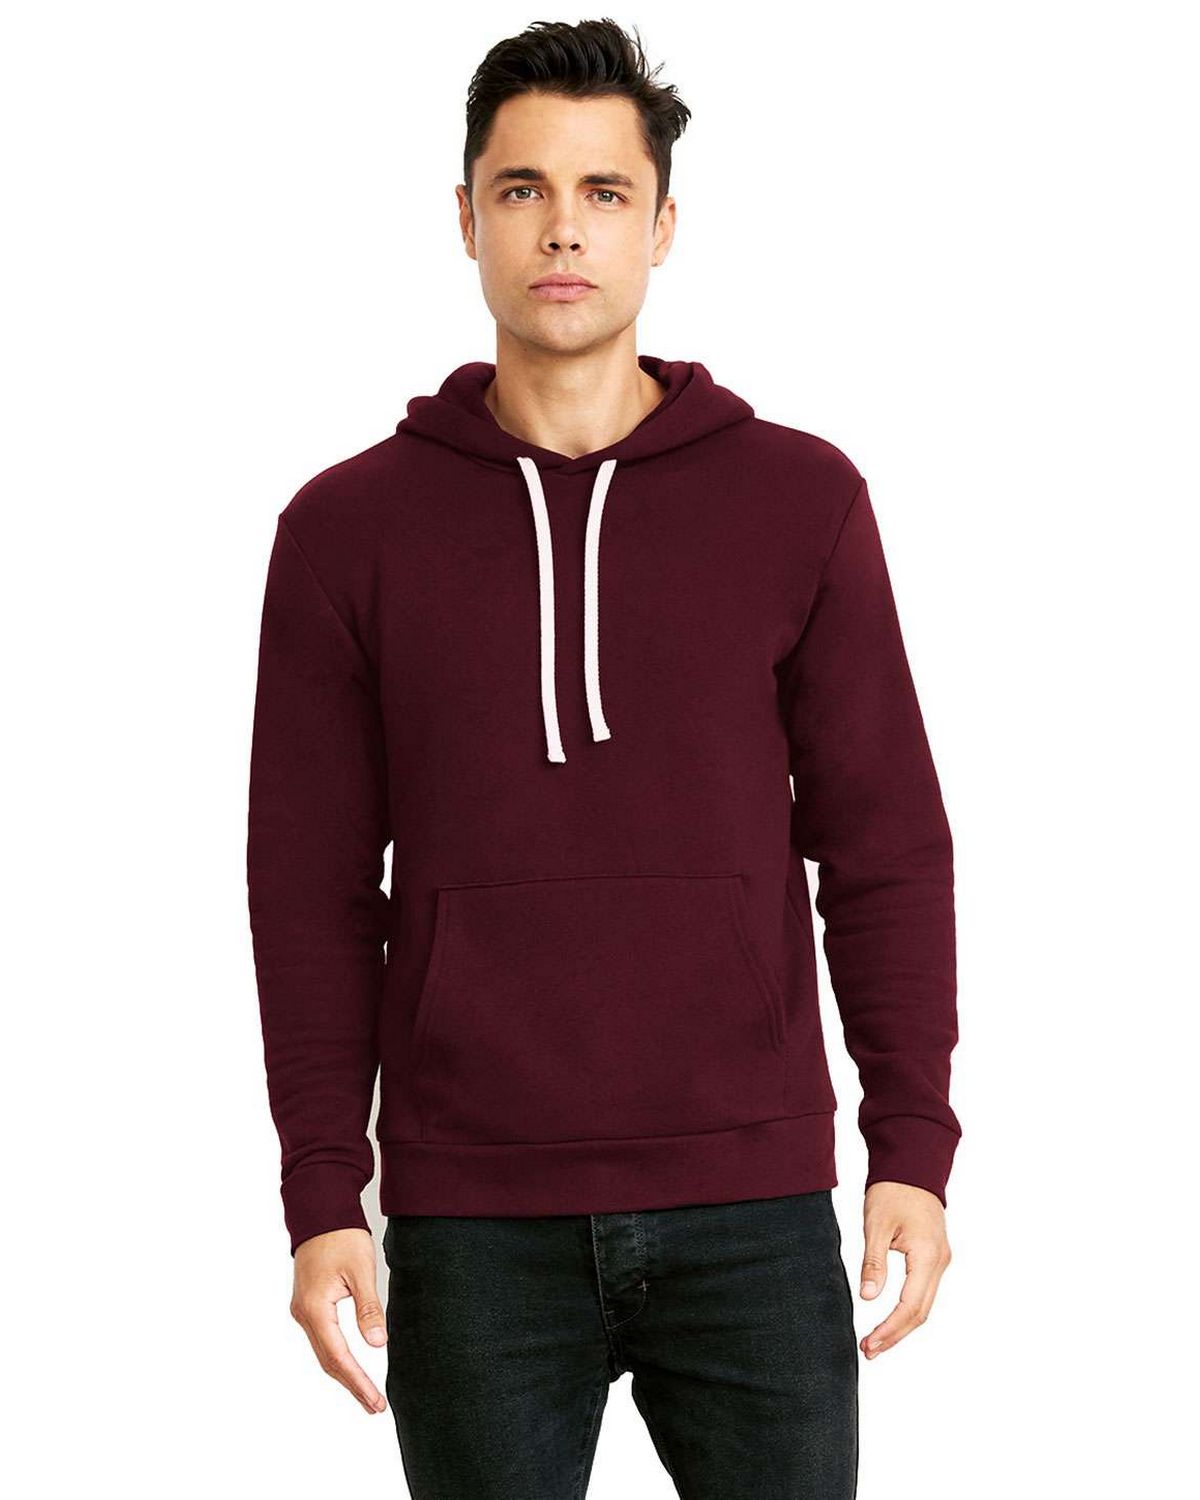 Next Level 9303 Unisex Pullover Hoodie - Shop at ApparelnBags.com